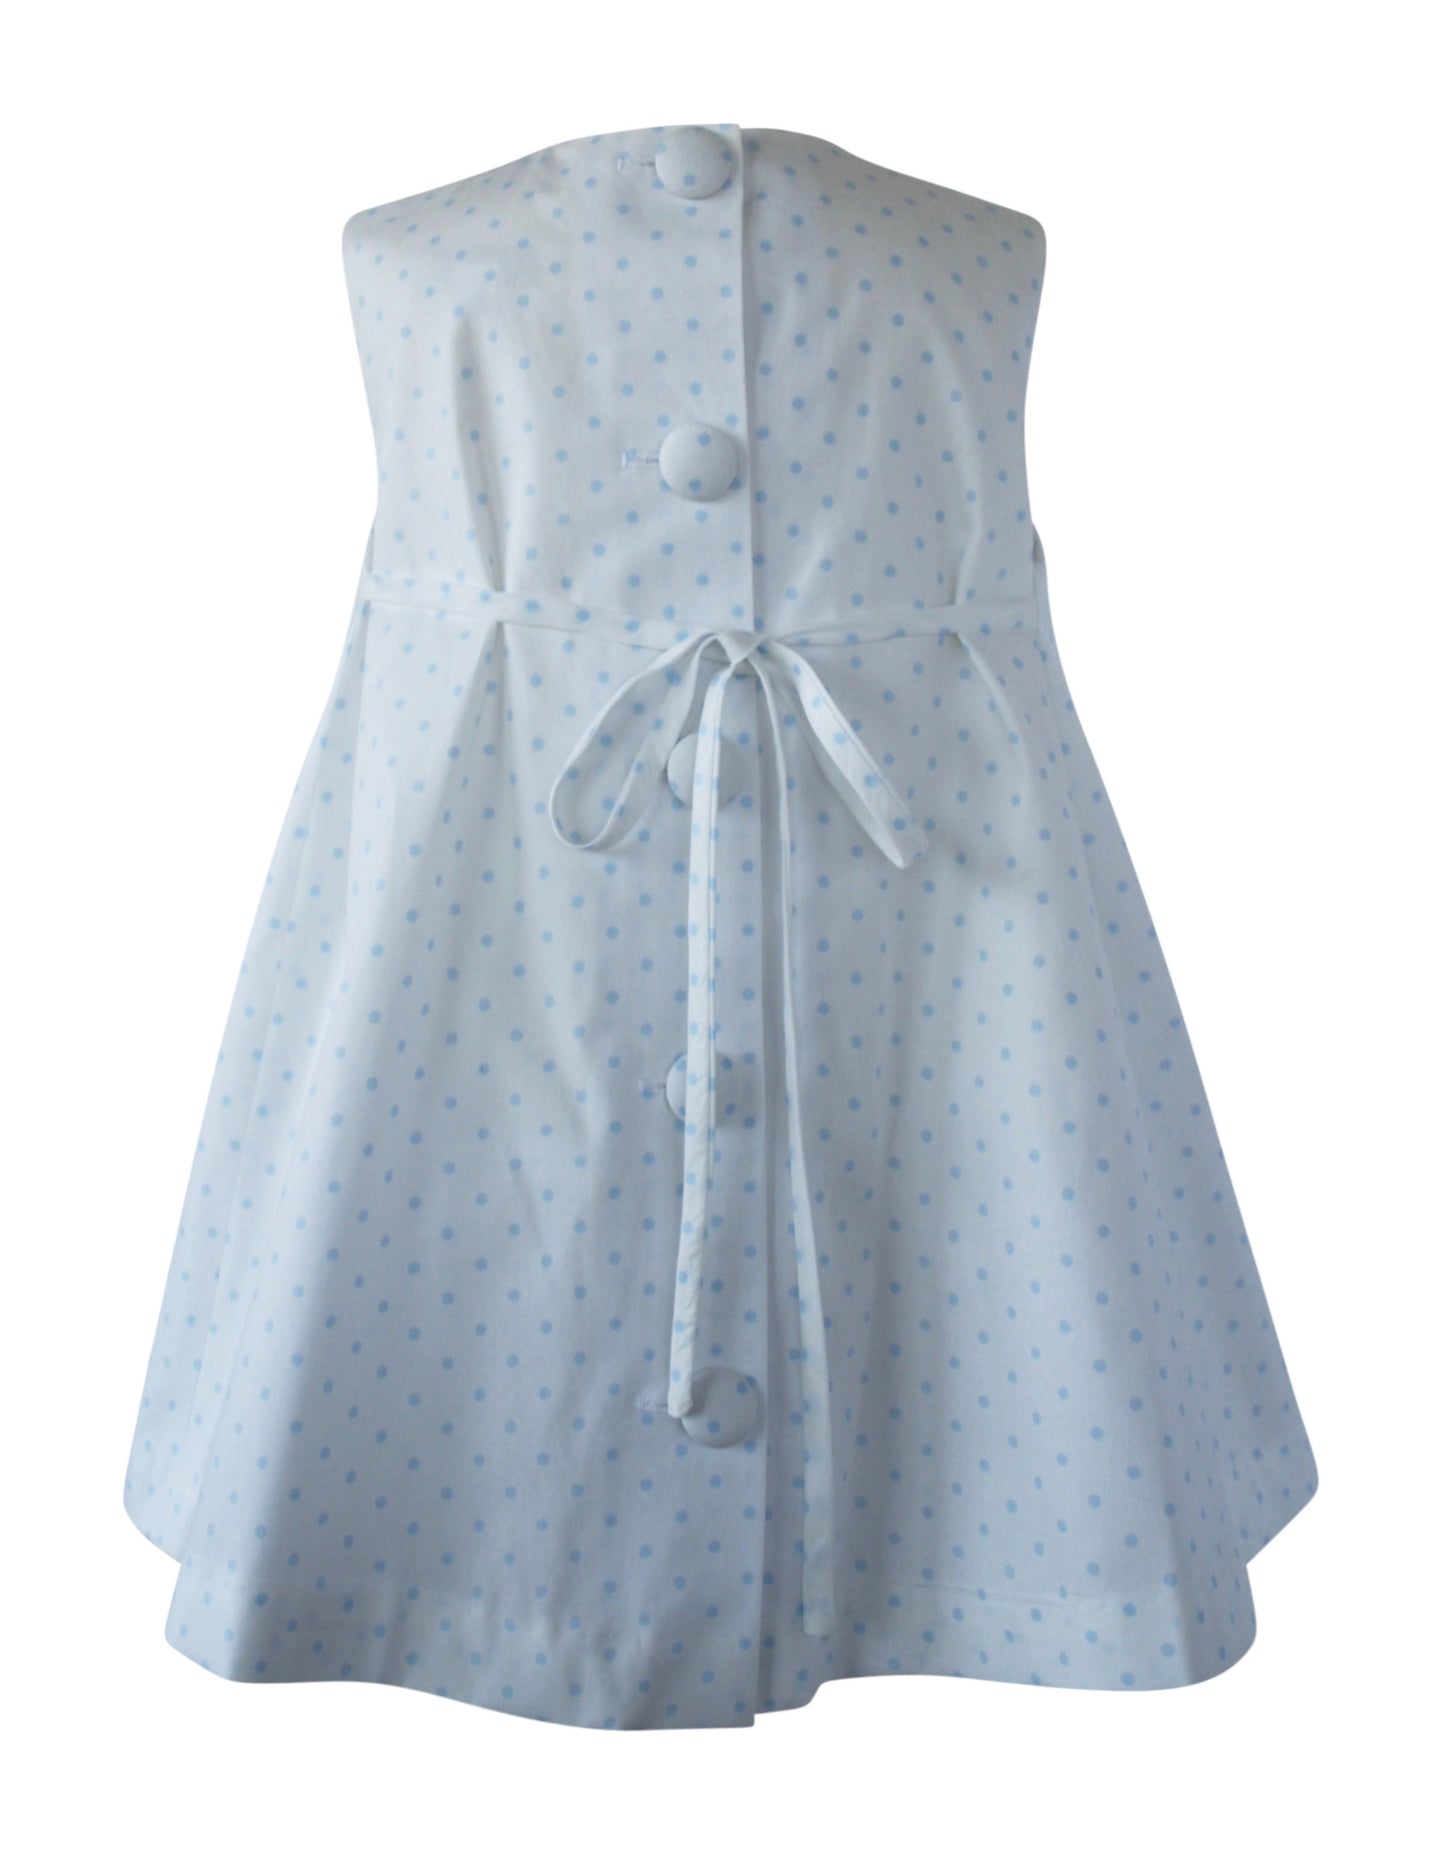 Helena and Harry Girl's Blue Baby Dot Bow Front Dress